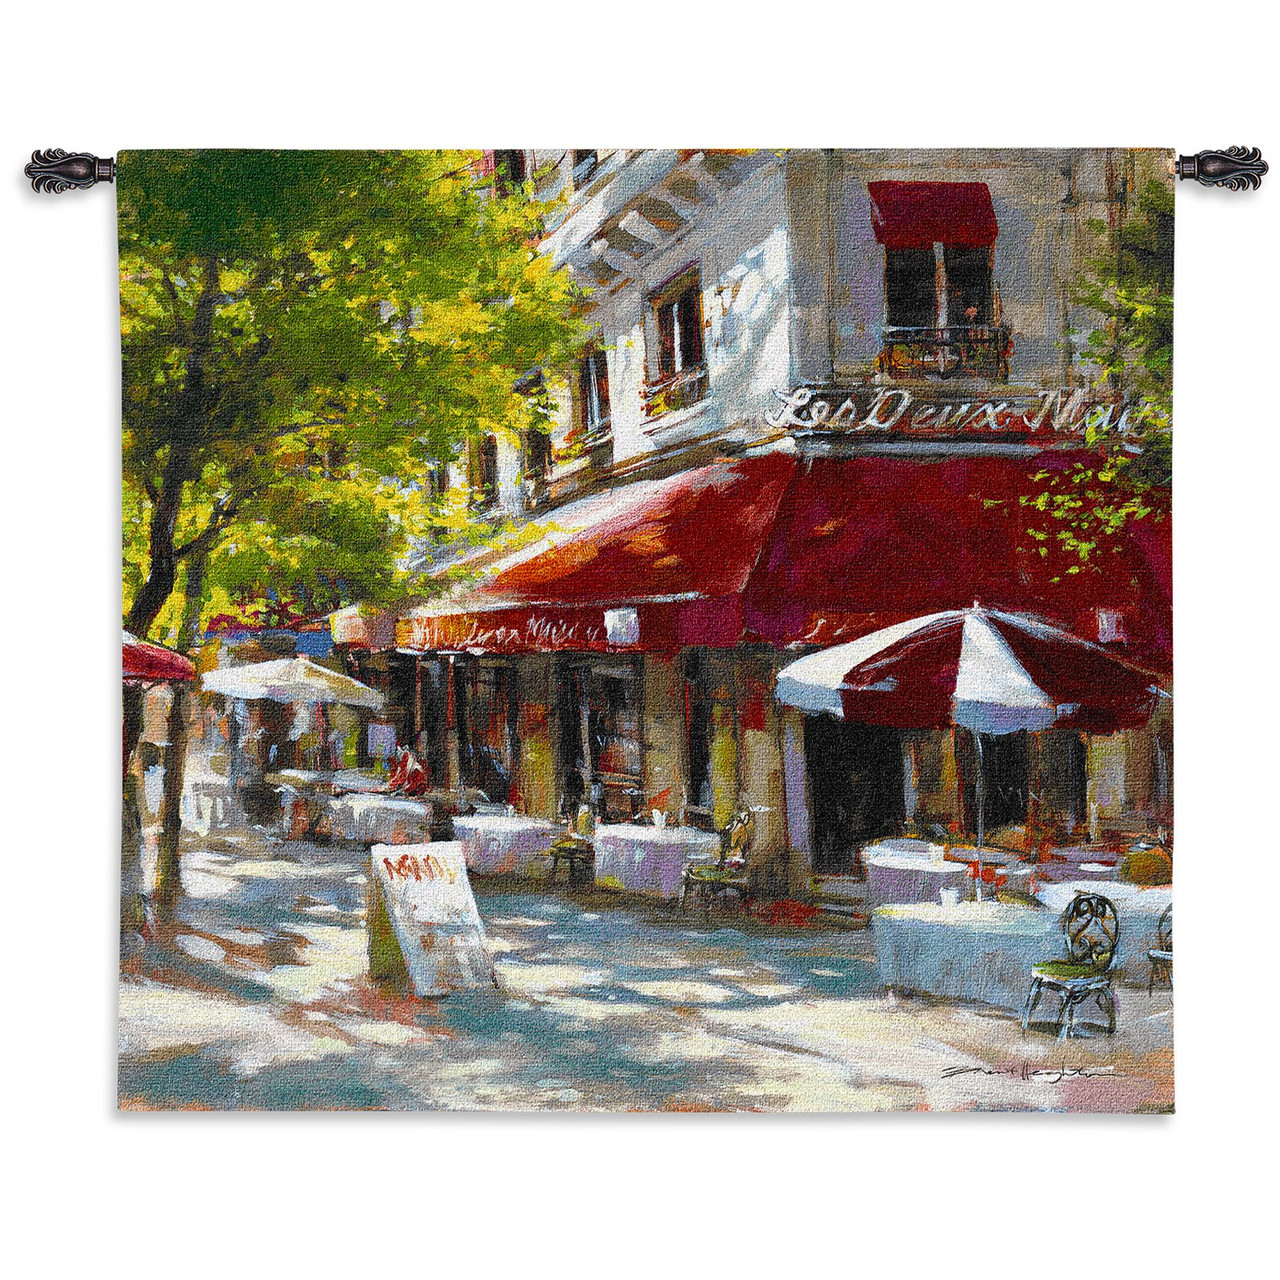 Corner Cafe II by Brent Heighten | Woven Tapestry Wall Art Hanging ...